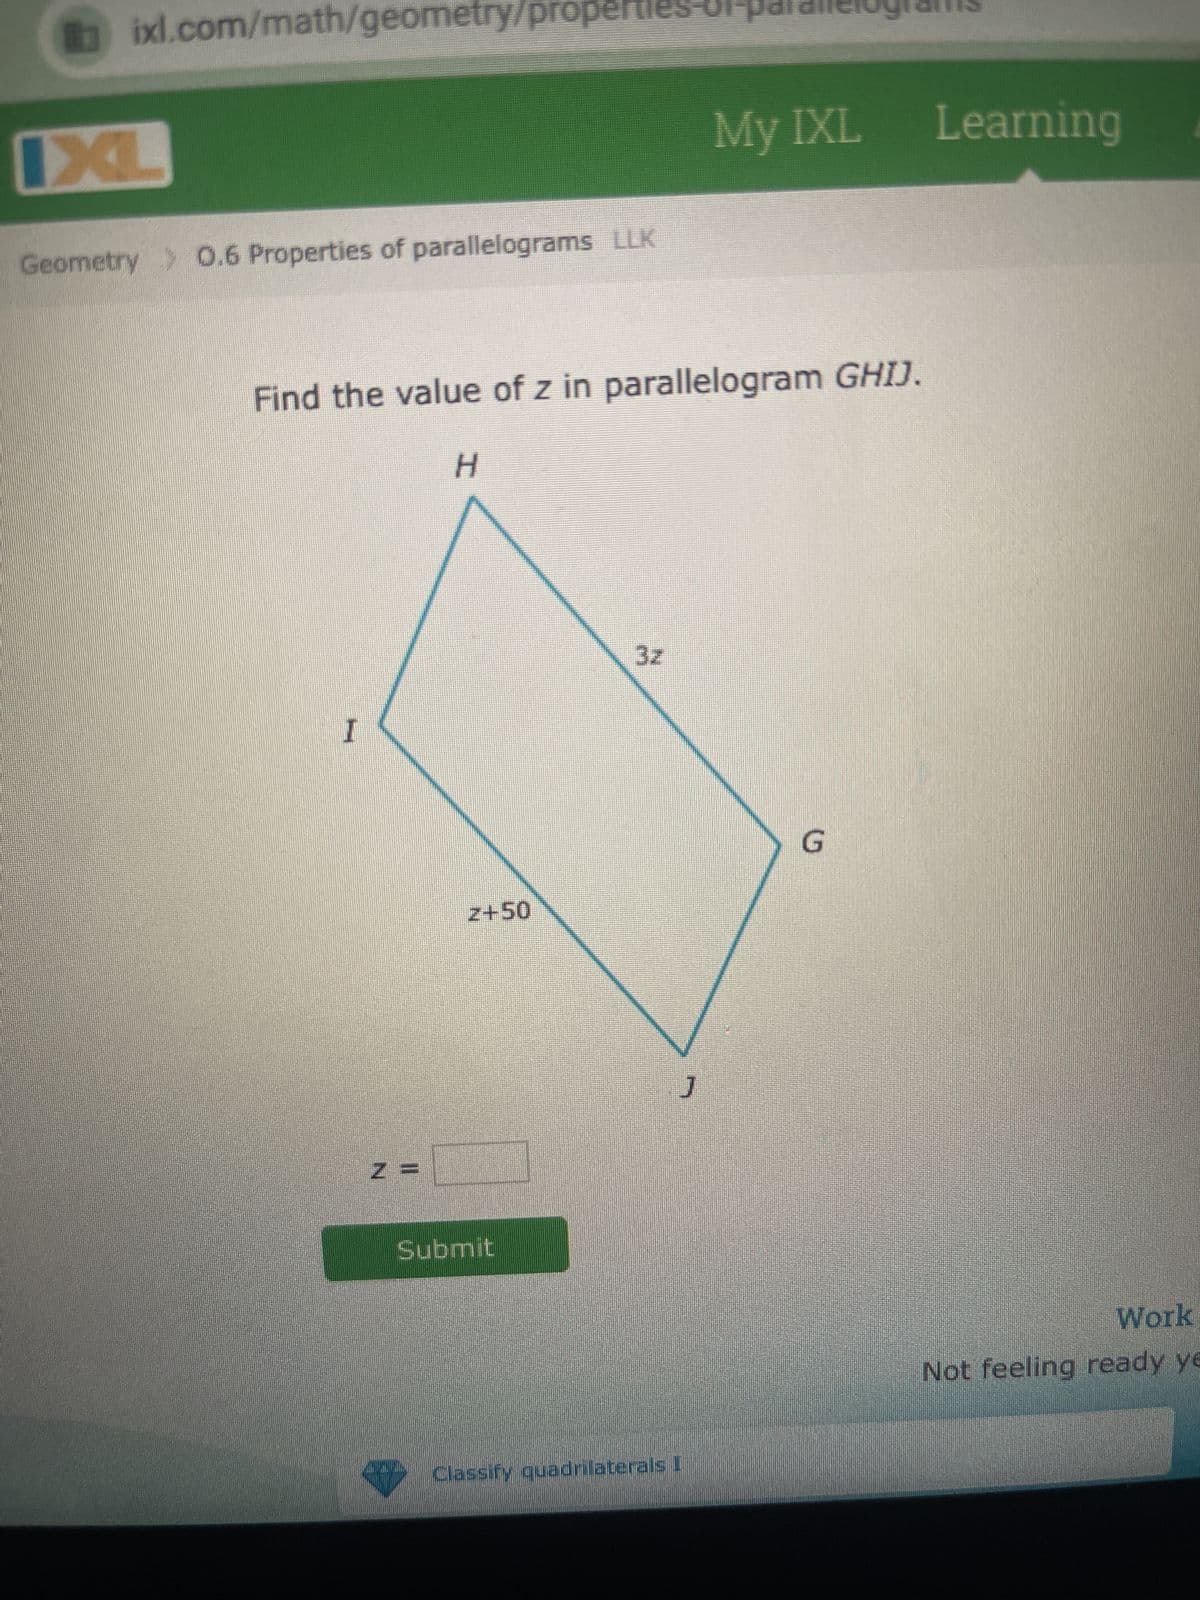 ixl.com/math/geometry/properties
IXL
Geometry > 0.6 Properties of parallelograms LLK
Find the value of z in parallelogram GHIJ.
I
z =
H
2+50
Submit
J
My IXL Learning
Classify quadrilaterals I
G
Work
Not feeling ready ye